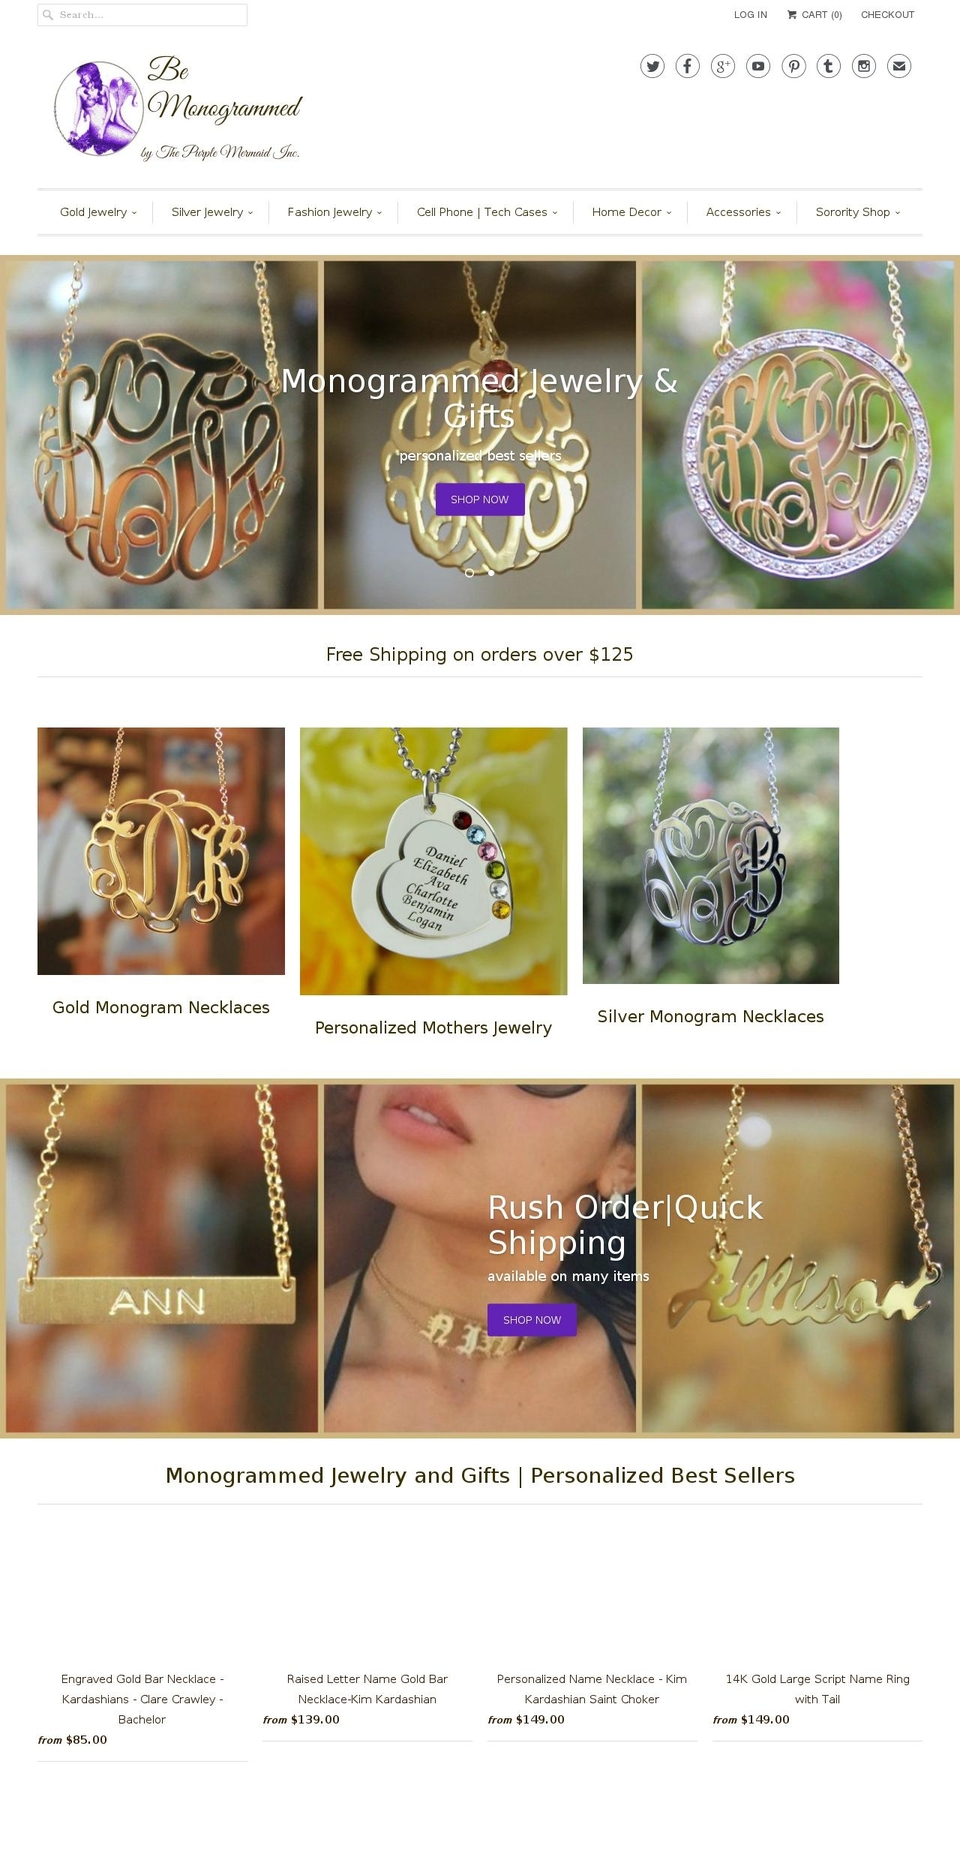 Dawn Shopify theme site example be-monogrammed.myshopify.com